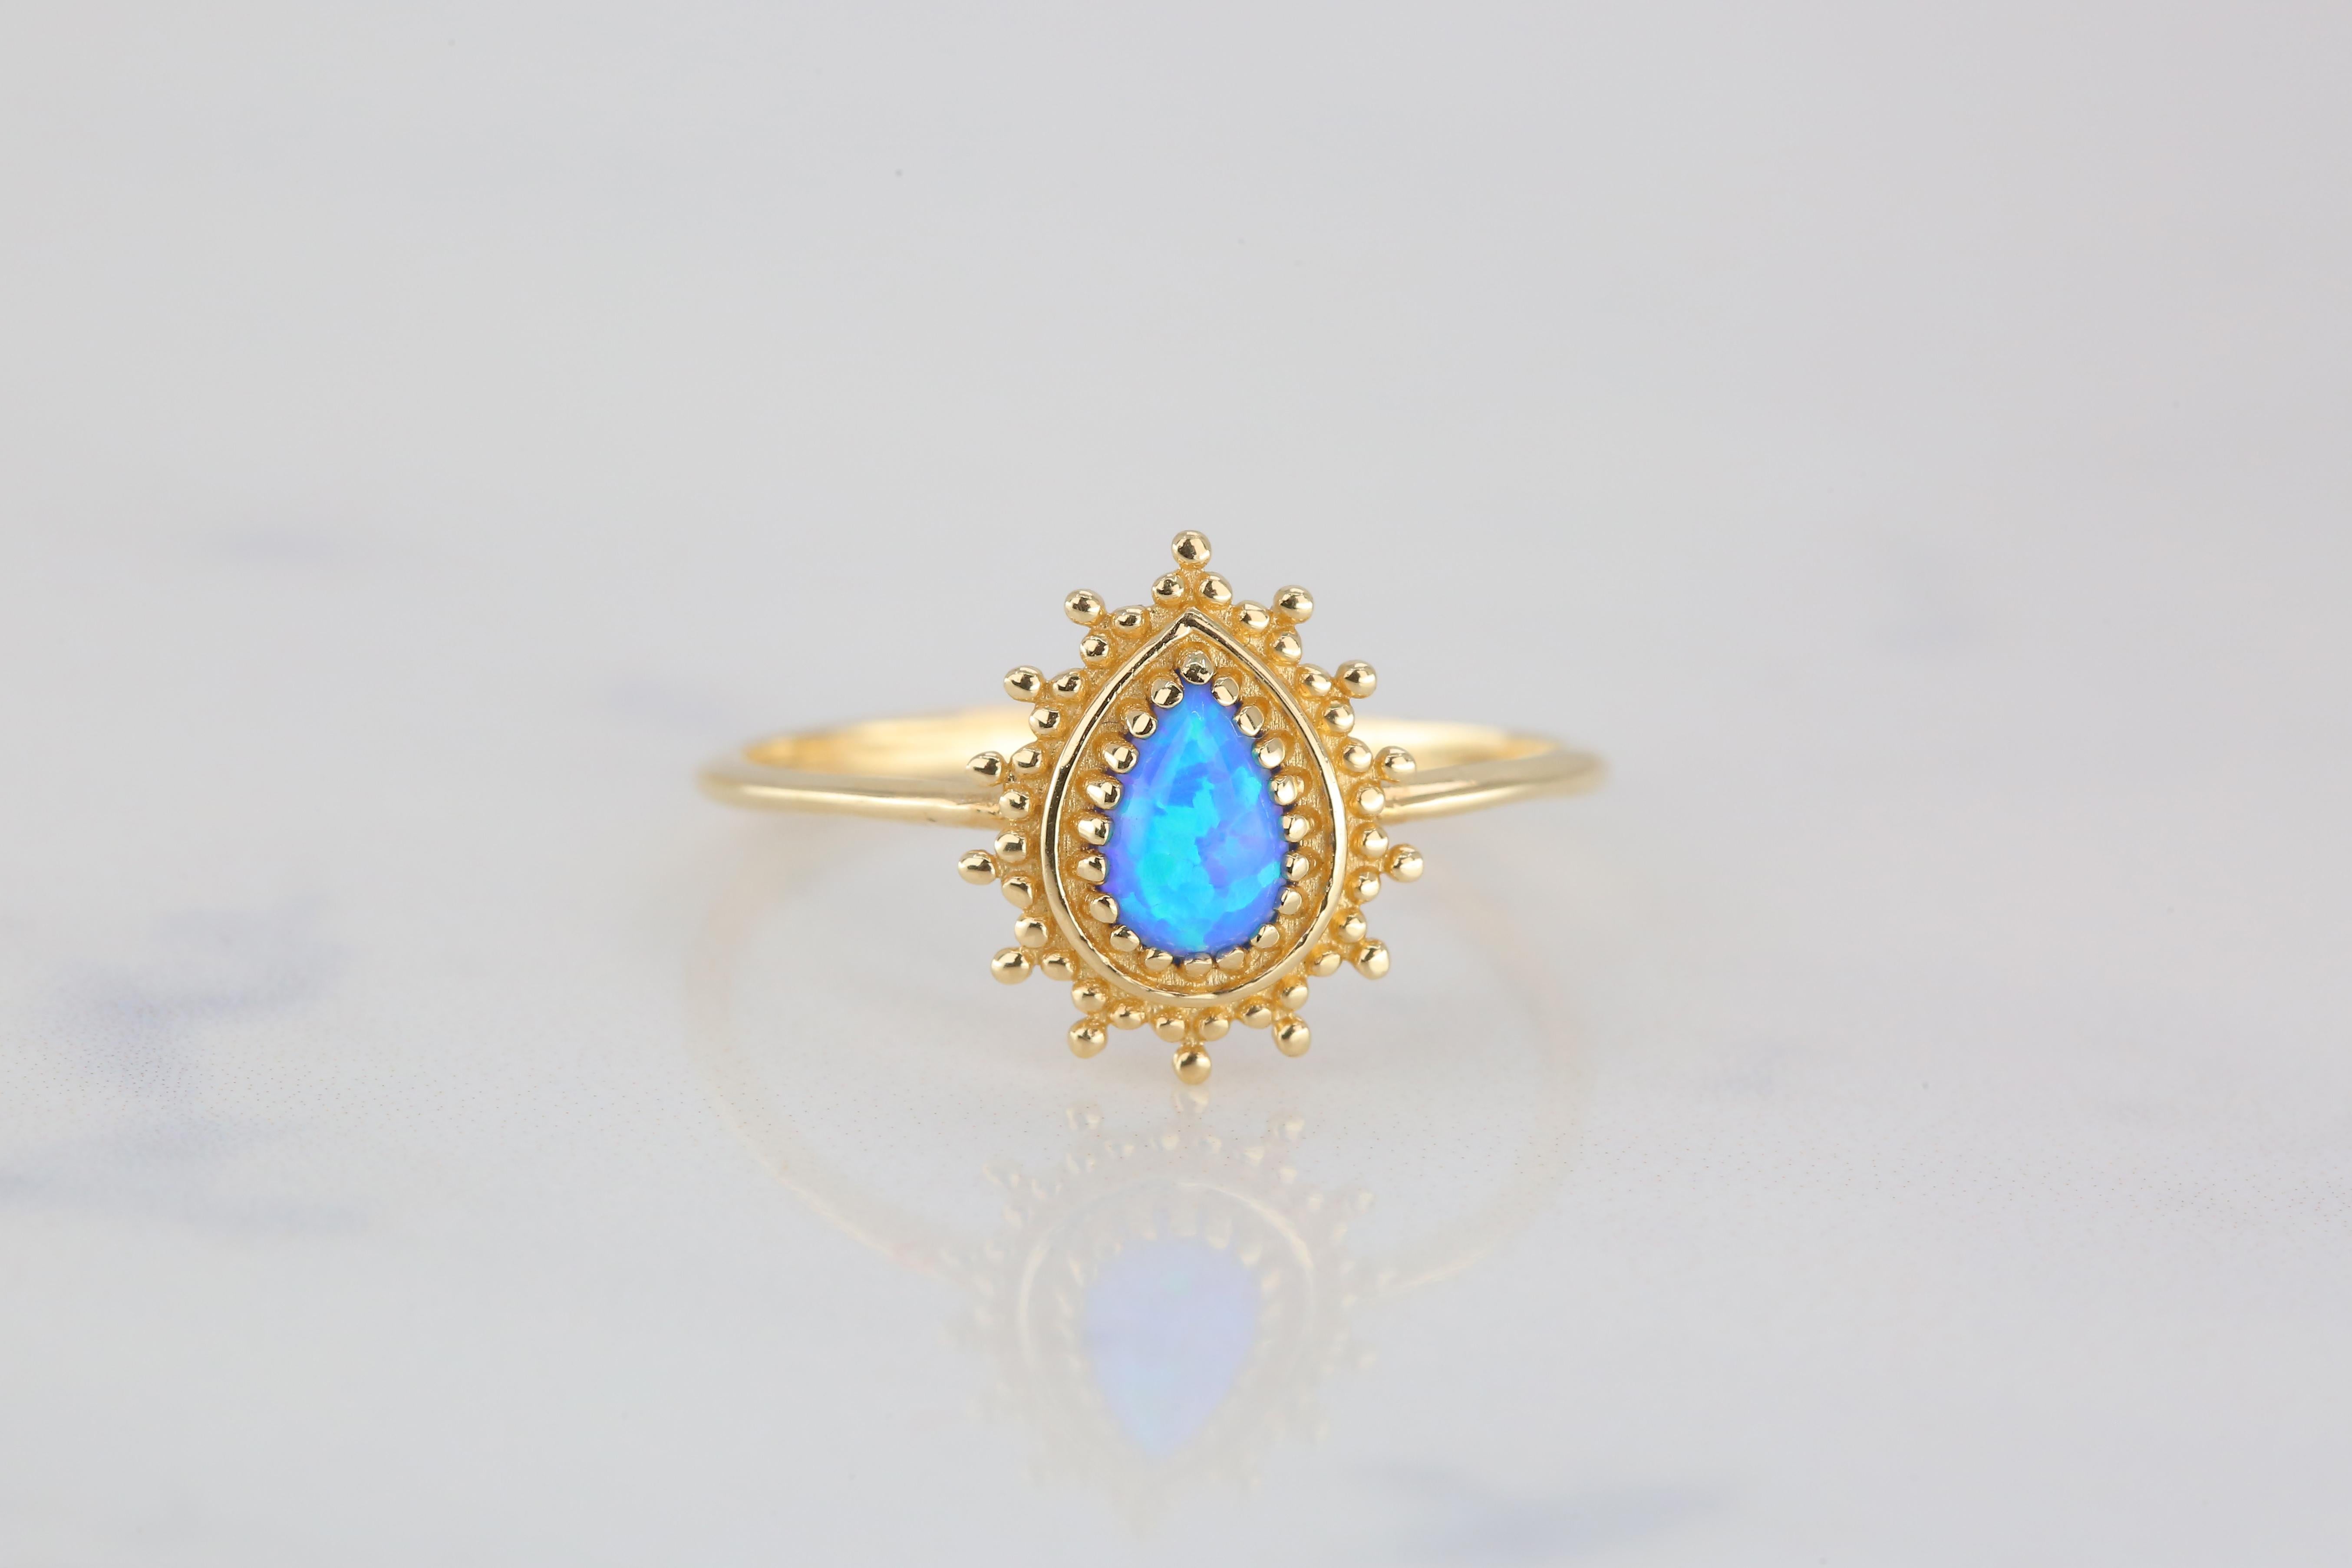 For Sale:  14k Gold Ring, Daily Gold Jewelry, Gift Rings, Combined Ring, Stone Ring 3